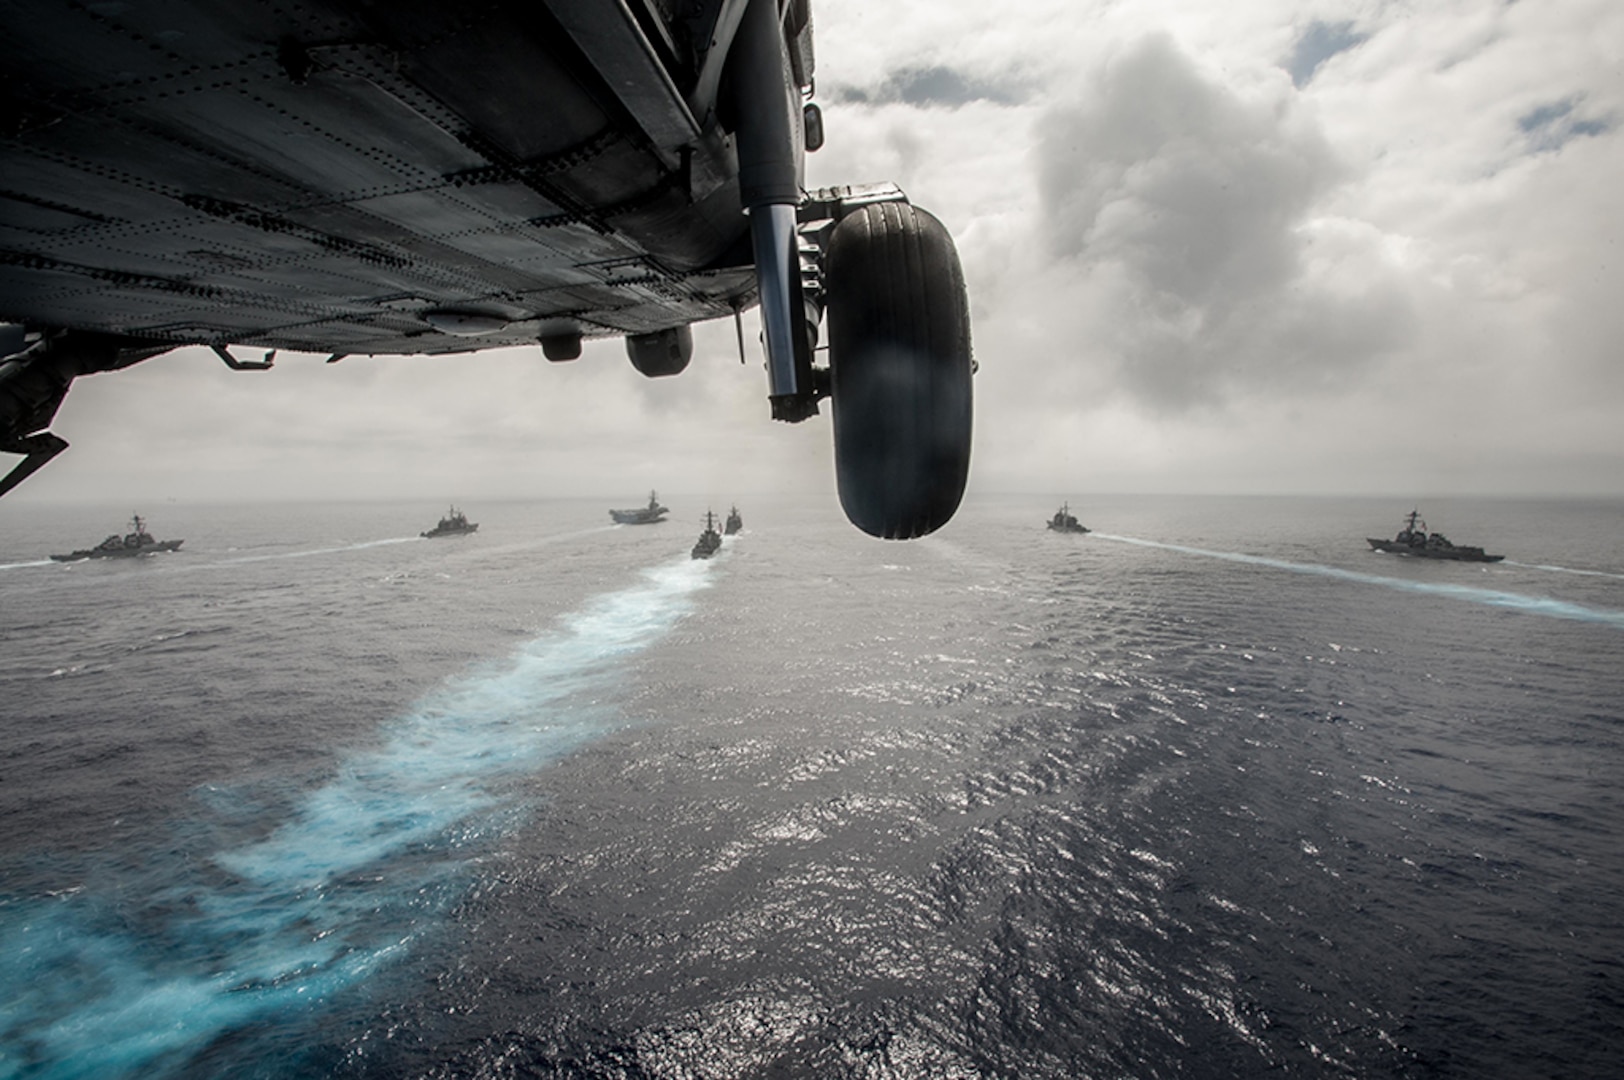 (June 18, 2016) - The Nimitz-class Aircraft carriers USS John C. Stennis (CVN 74) and USS Ronald Reagan (CVN 76) conduct dual aircraft carrier strike group operations in the U.S. 7th Fleet area of operations in support of security and stability in the Indo-Asia-Pacific. The operations mark the U.S. Navy’s continued presence throughout the area of responsibility. 